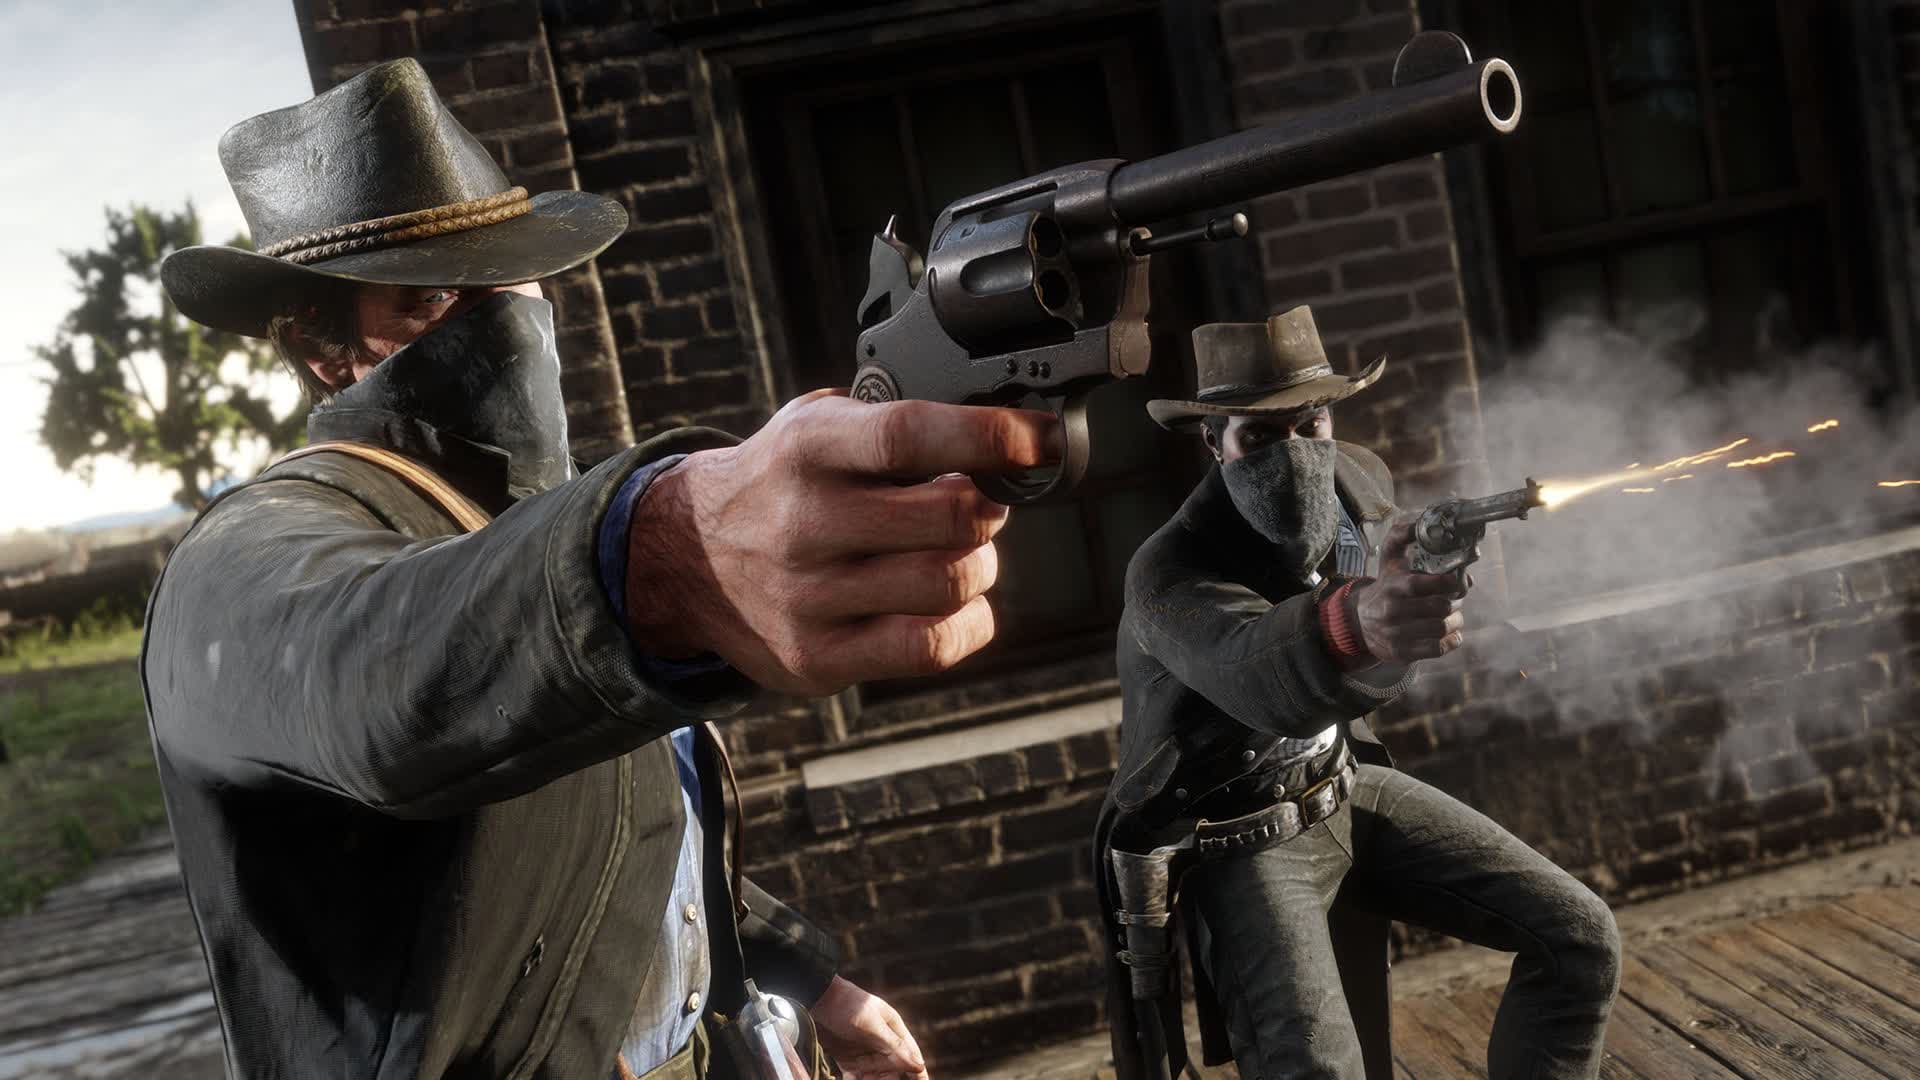 Red Dead Redemption 2 is now playable in VR thanks to this new fan mod